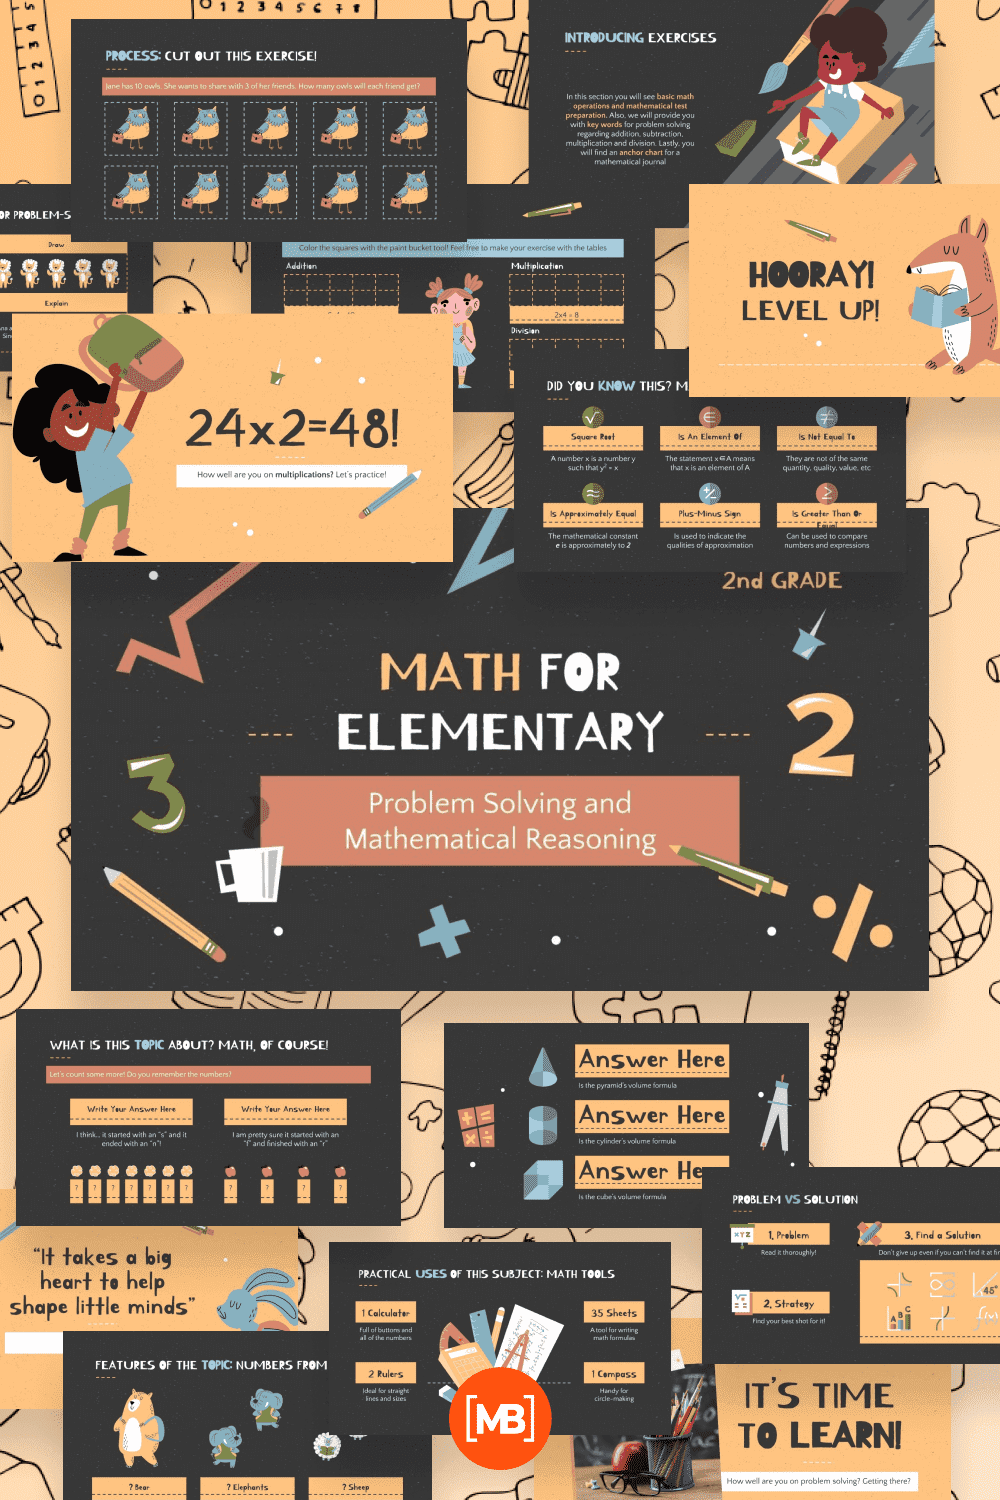 Problem solving and mathematical reasoning powerpoint template.